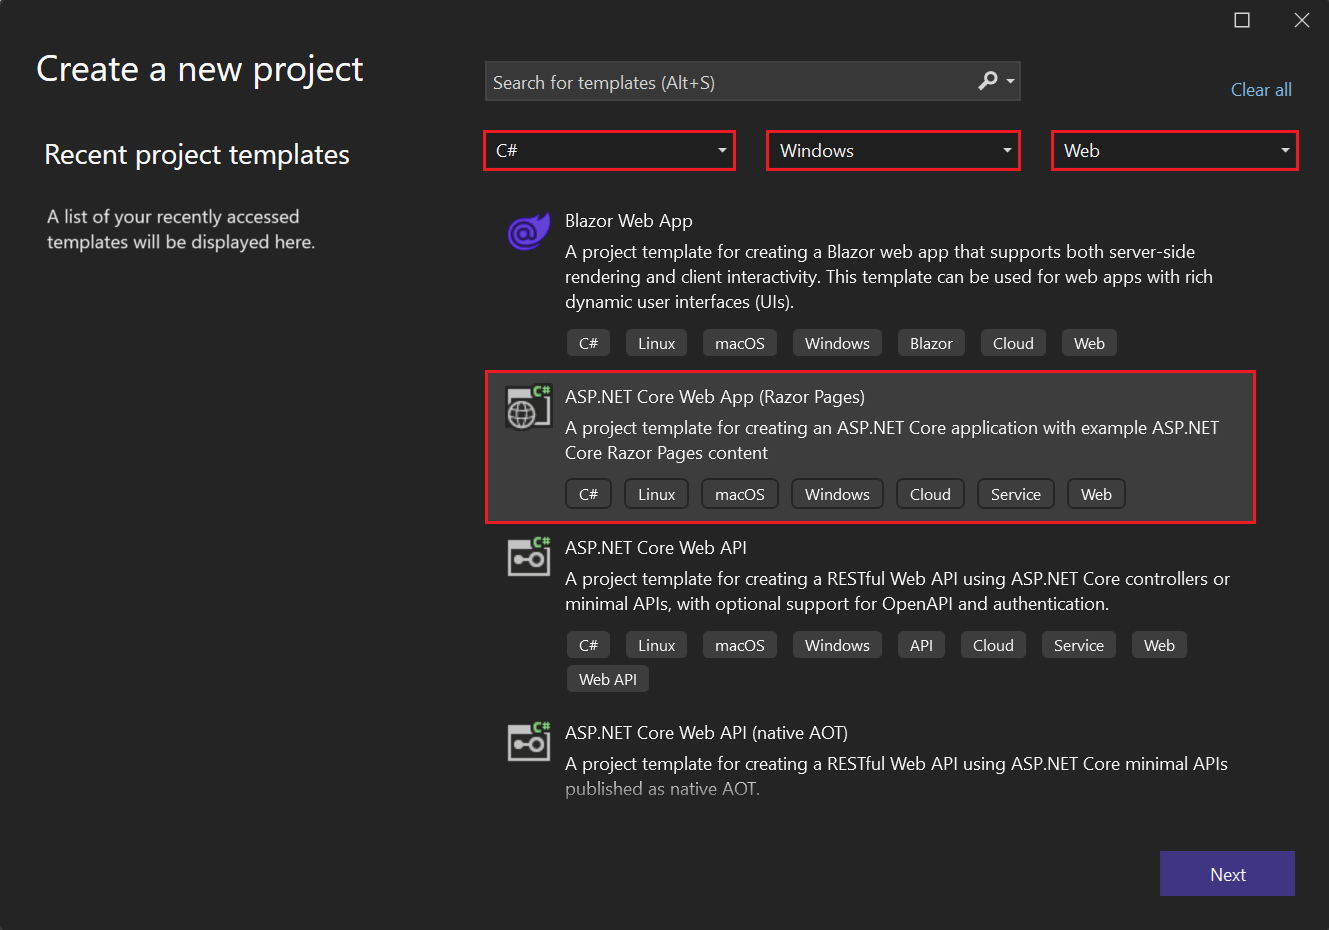 Screenshot that shows the ASP.NET Core Web App project template selected and highlighted on the Create a new project page.